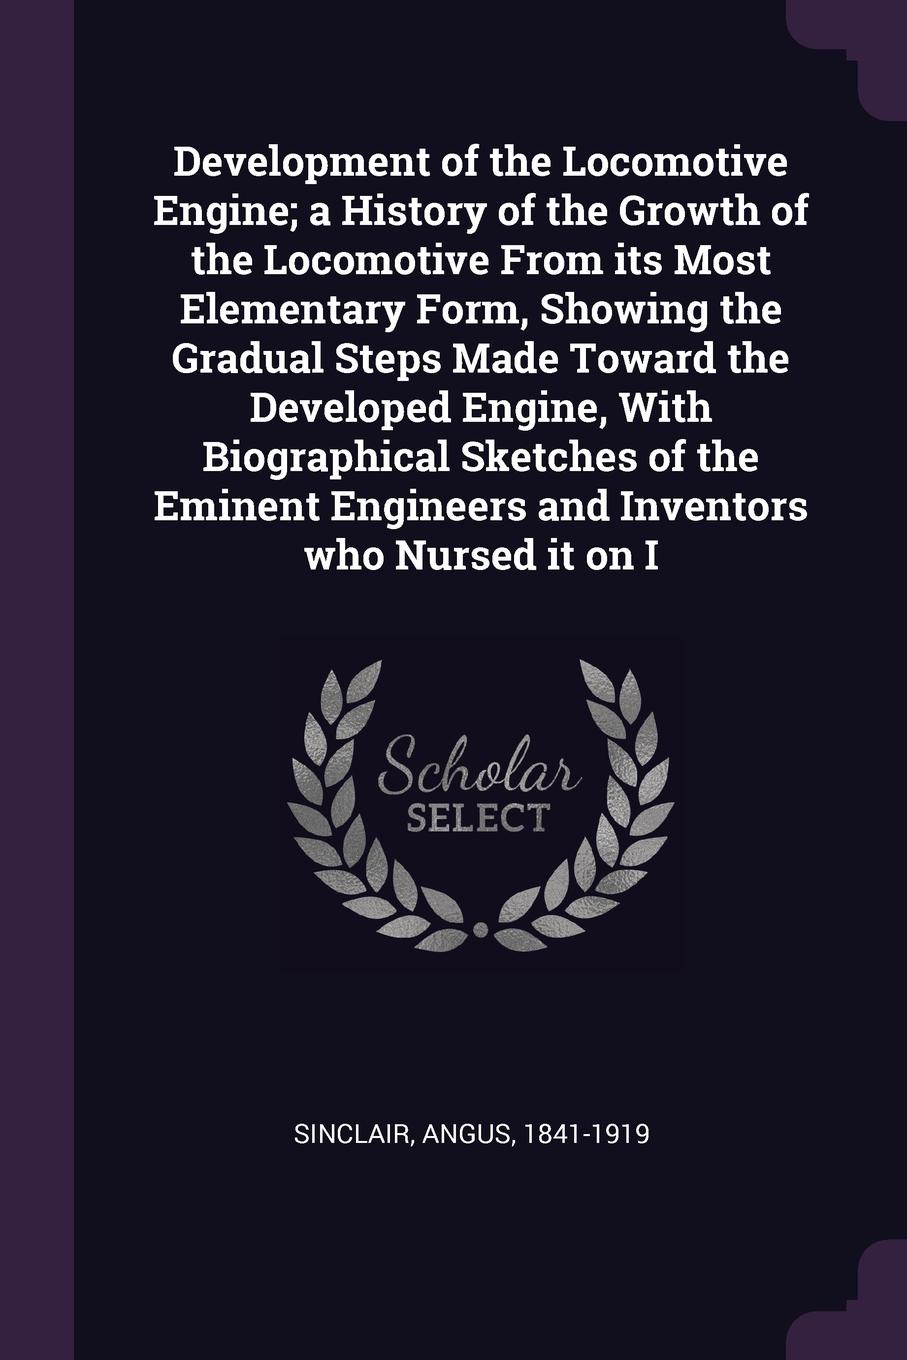 Development of the Locomotive Engine; a History of the Growth of the Locomotive From its Most Elementary Form, Showing the Gradual Steps Made Toward the Developed Engine, With Biographical Sketches of the Eminent Engineers and Inventors who Nursed...